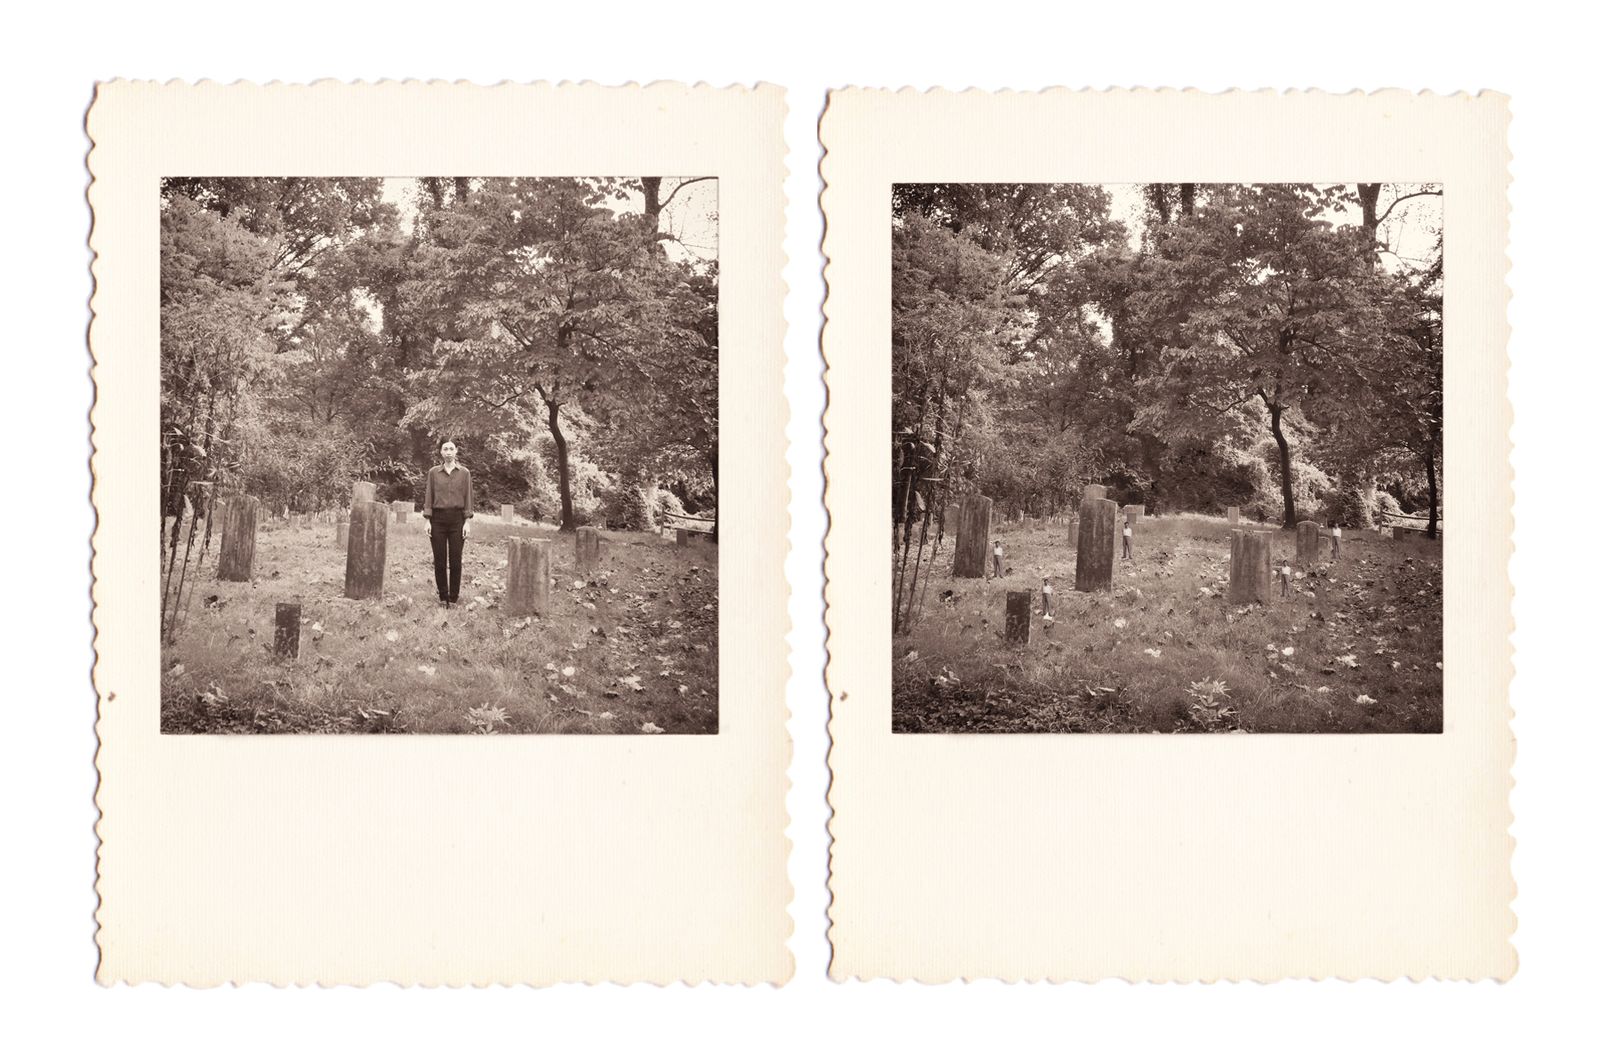 © QUYNH LAM - a brief of history: Stanton Cemetery